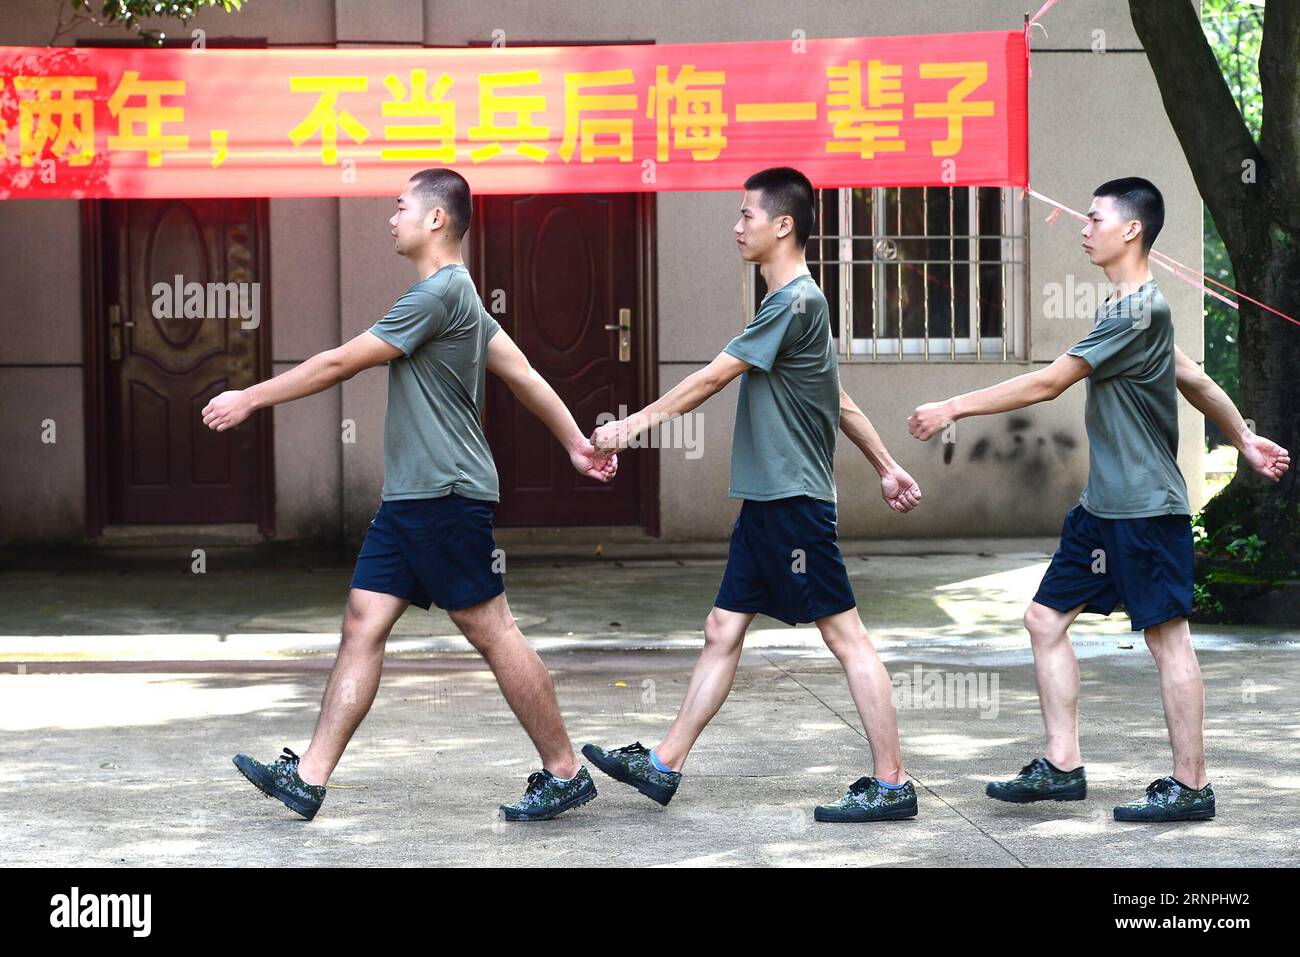 (170830) -- LIUZHOU, Aug. 30, 2017 -- Deng Feng (1st L) takes part in a training for joining the army in Liuzhou, south China s Guangxi Zhuang Autonomous Region, Aug. 30, 2017. Deng, 24, who just graduated from Xingjian College of Science and Liberal Arts of Guangxi University, has signed for the army twice. When he was a freshman, Deng Feng was for the first time recruited as a soldier of Guangxi Frontier Corps of Chinese Armed Police and was on service for two years. Deng Feng then left army and went back to Guangxi University until he finished his study. Upon graduation, however, Deng Feng Stock Photo